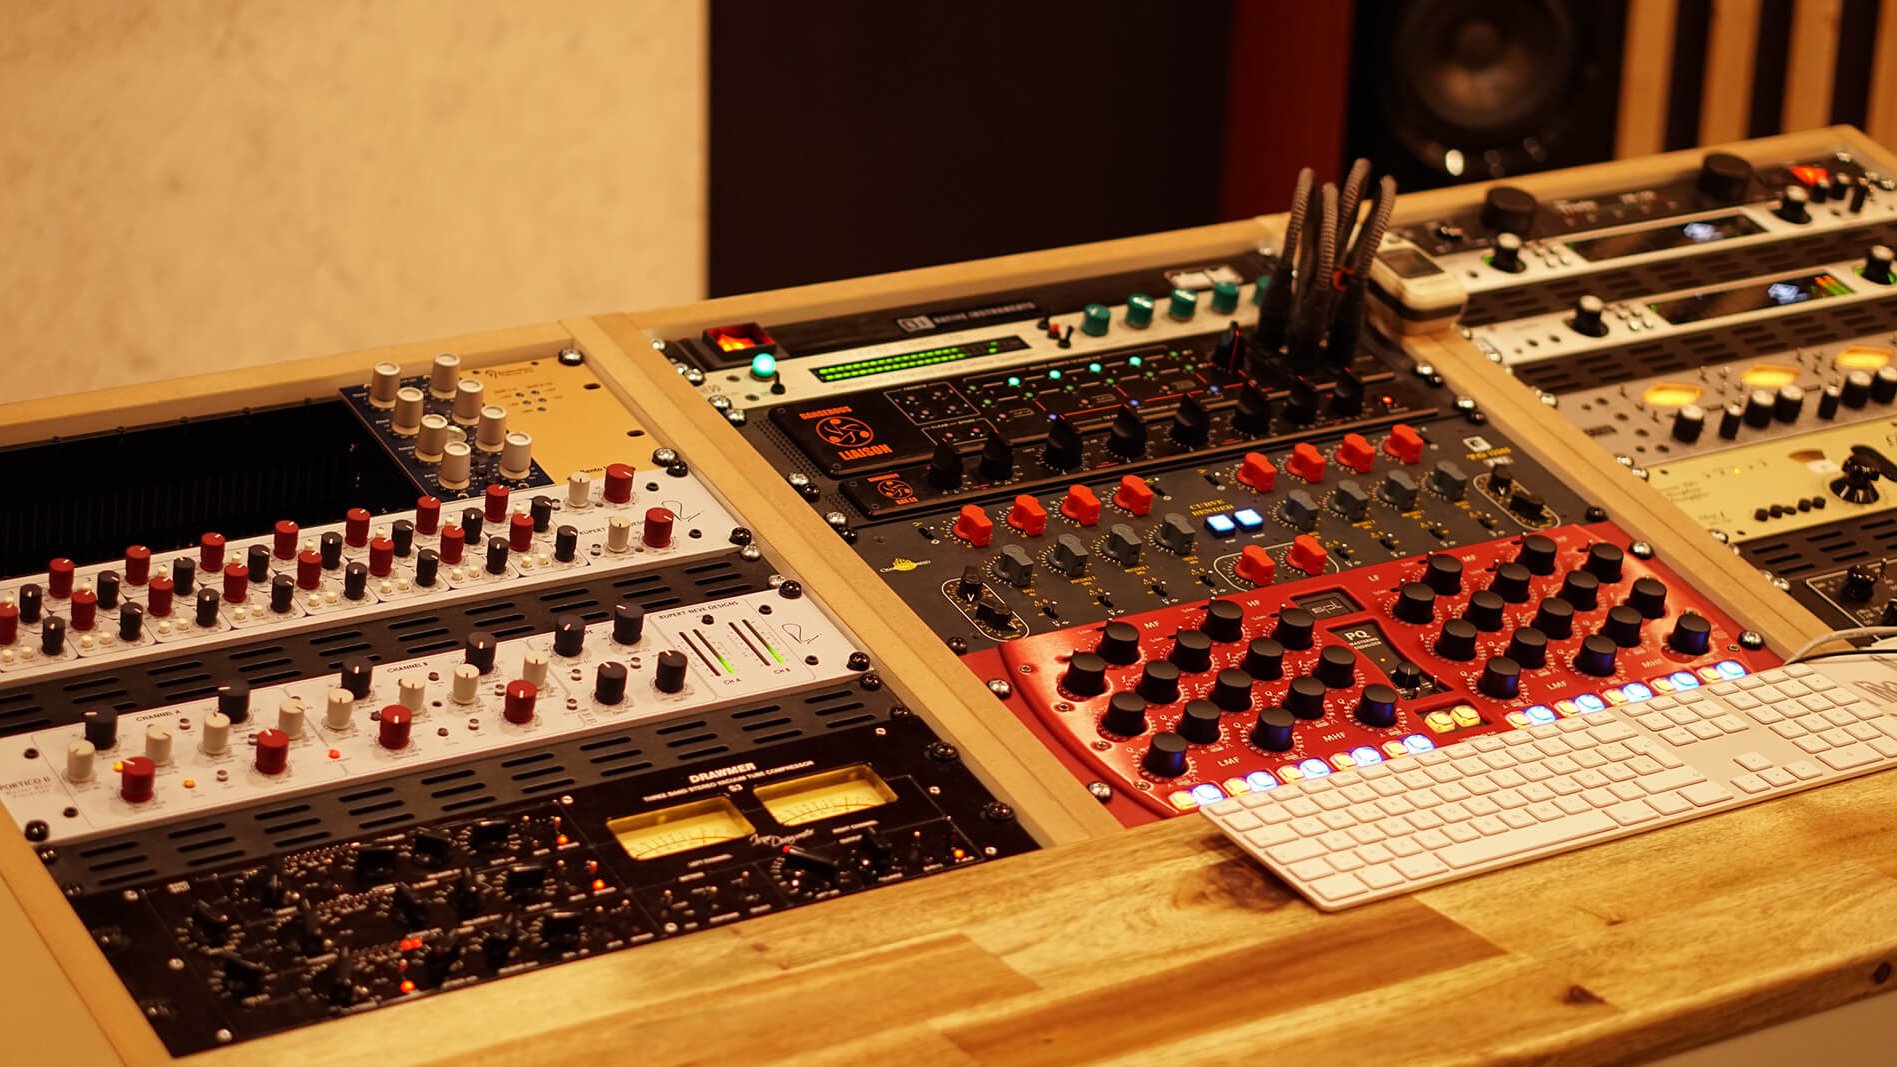 Flexible and constantly expanded: The mastering components in the Soundation Studio